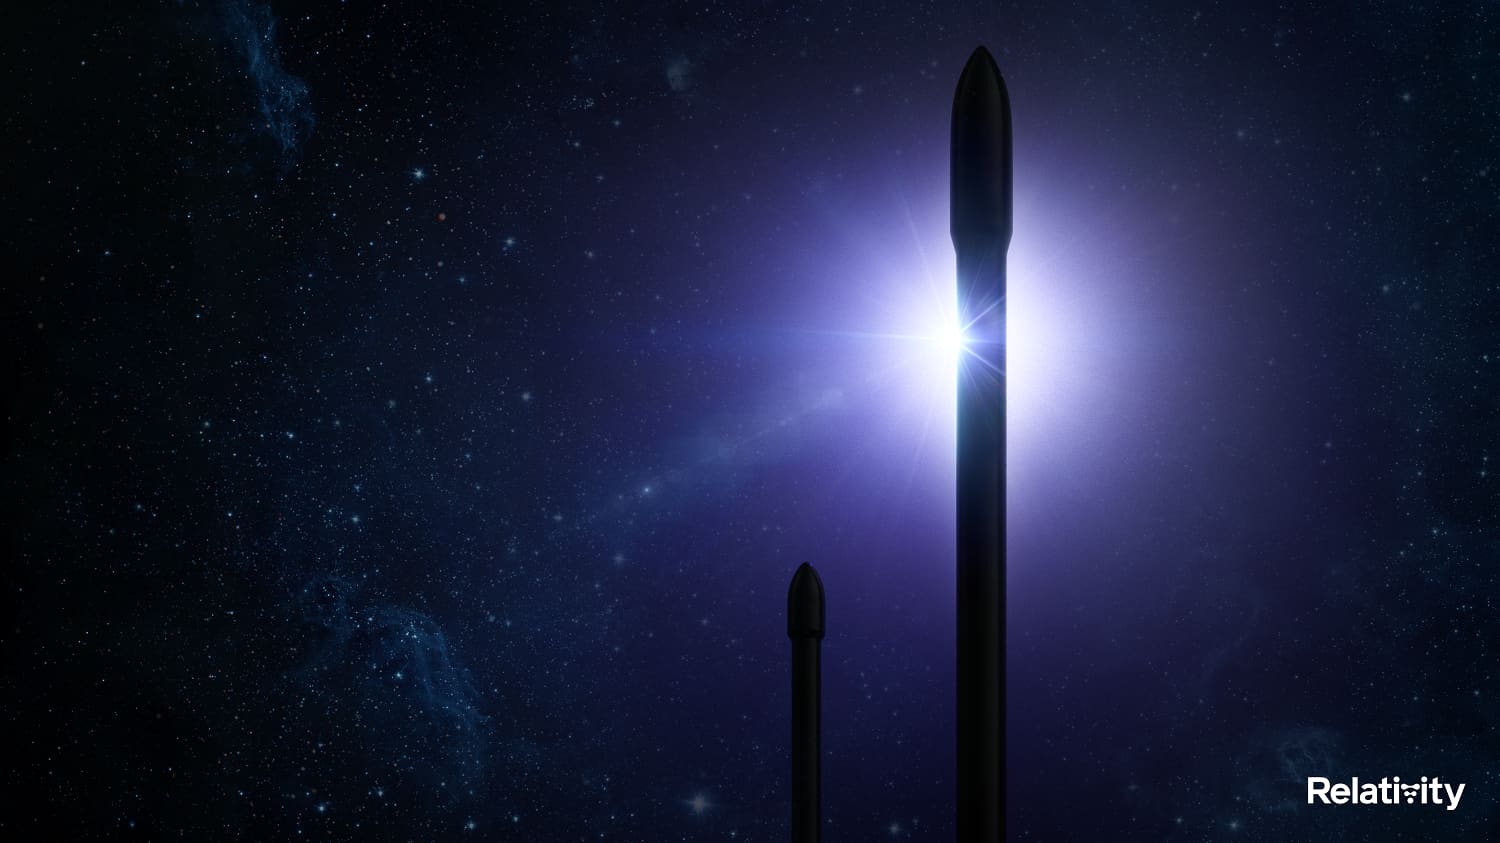 Relativity’s reusable Terran rocket competitor to SpaceX’s Falcon 9